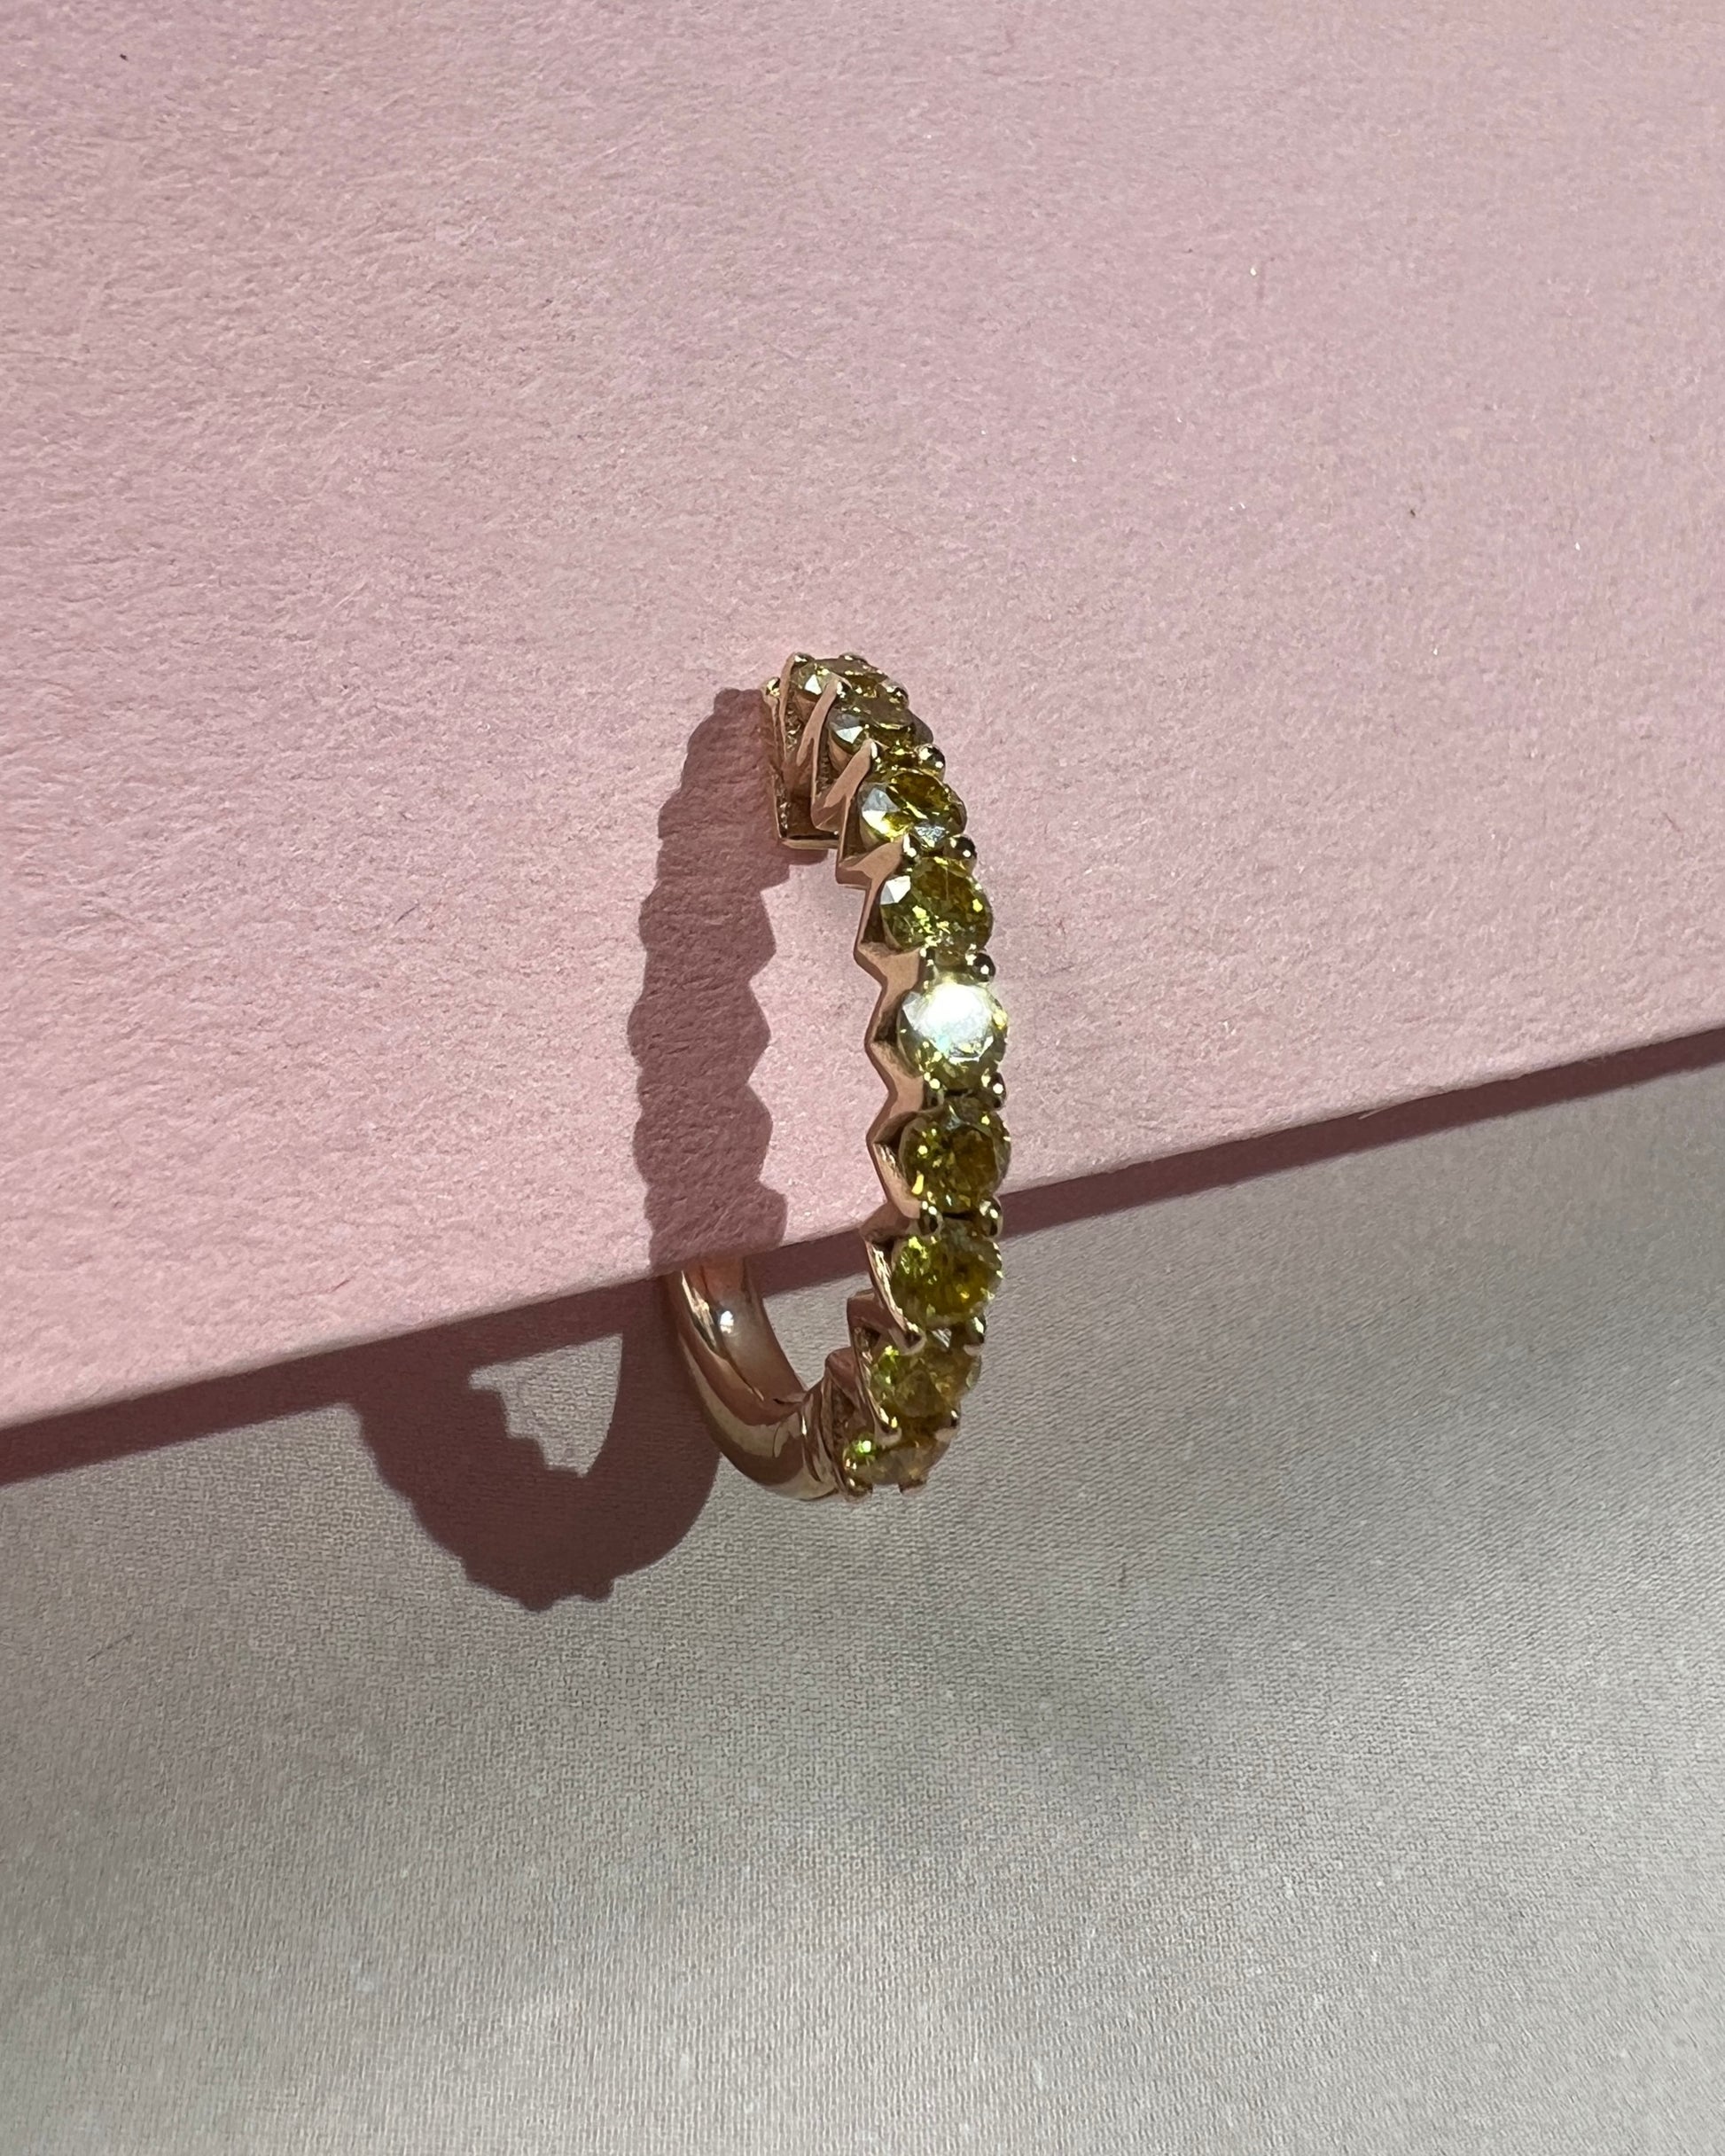 HOOP EARRING "ARCHES" WITH ROYAL YELLOW DIAMONDS / SOLID GOLD